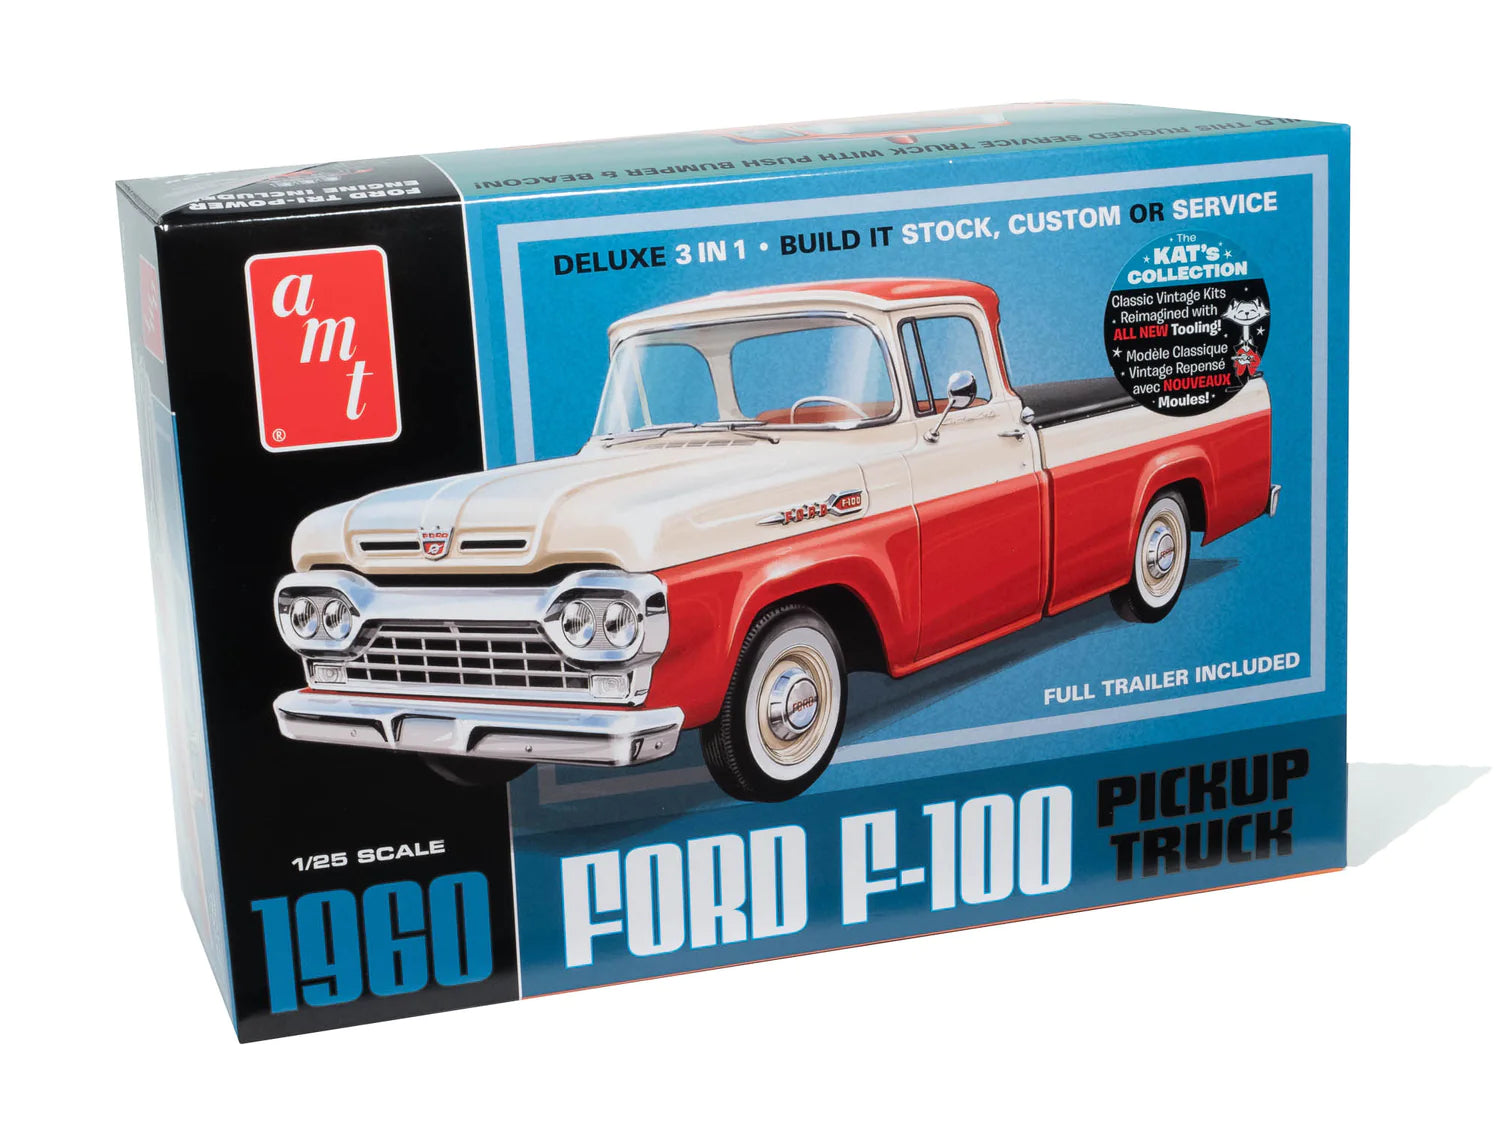 1960 Ford F-100 Pickup with trailer Plastic Model Kit